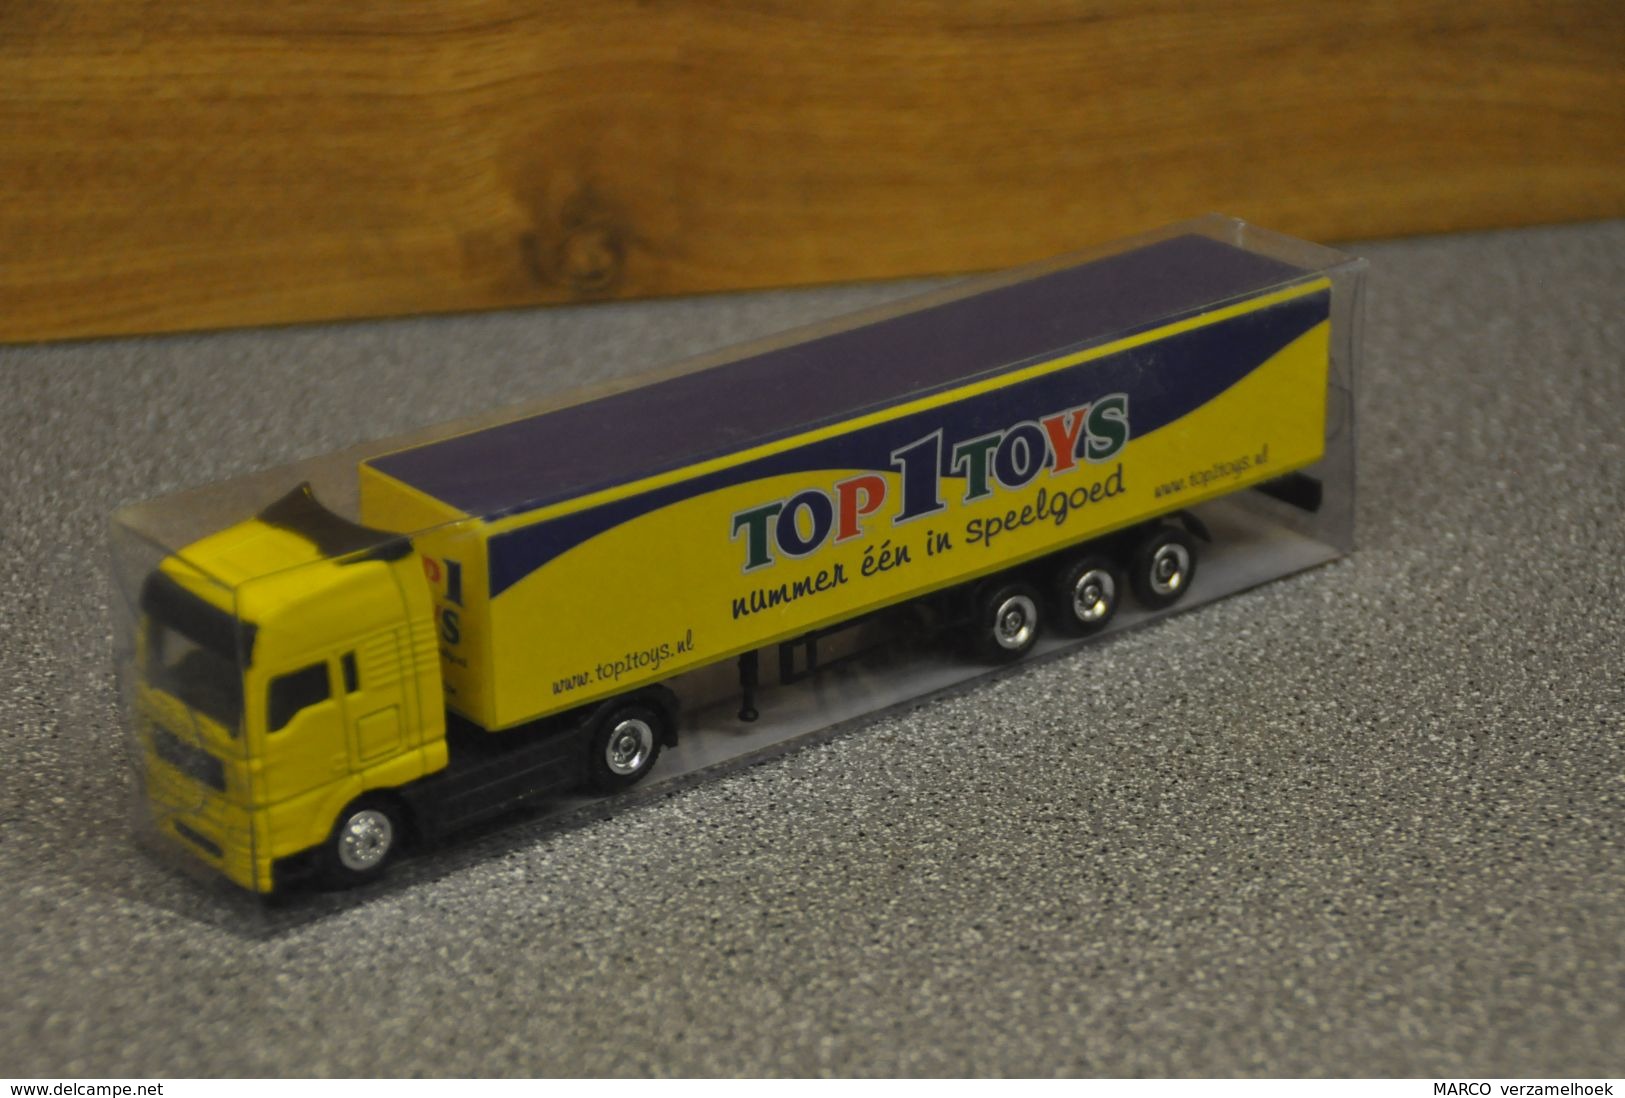 Top 1 Toys Scale 1:87 MAN - Trucks, Buses & Construction